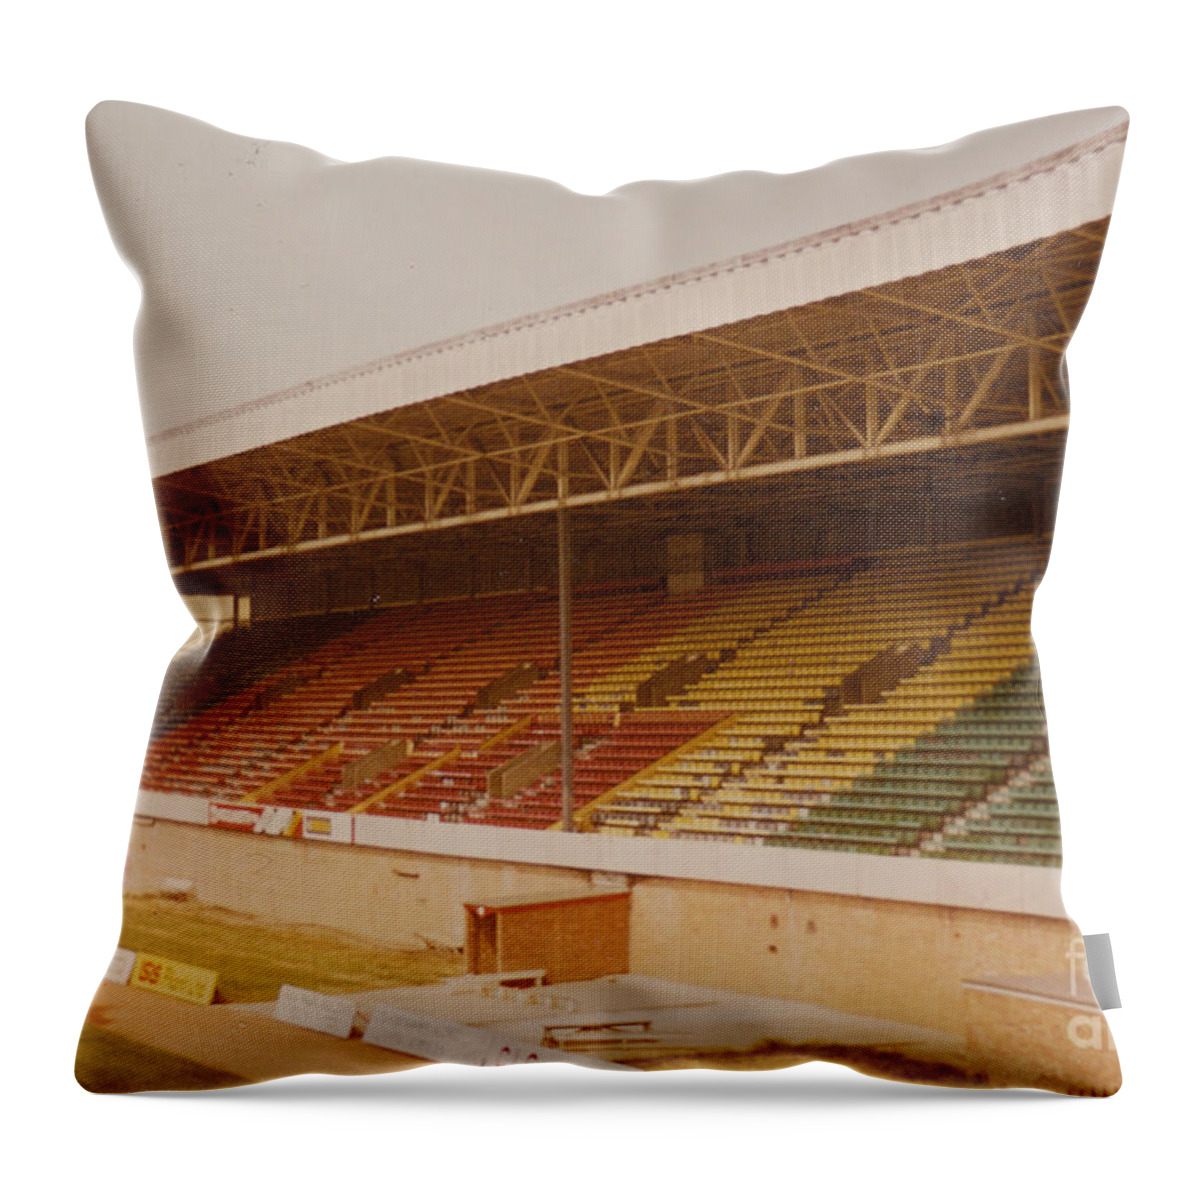  Throw Pillow featuring the photograph Swindon - County Ground - Main Stand 3 - 1970s by Legendary Football Grounds